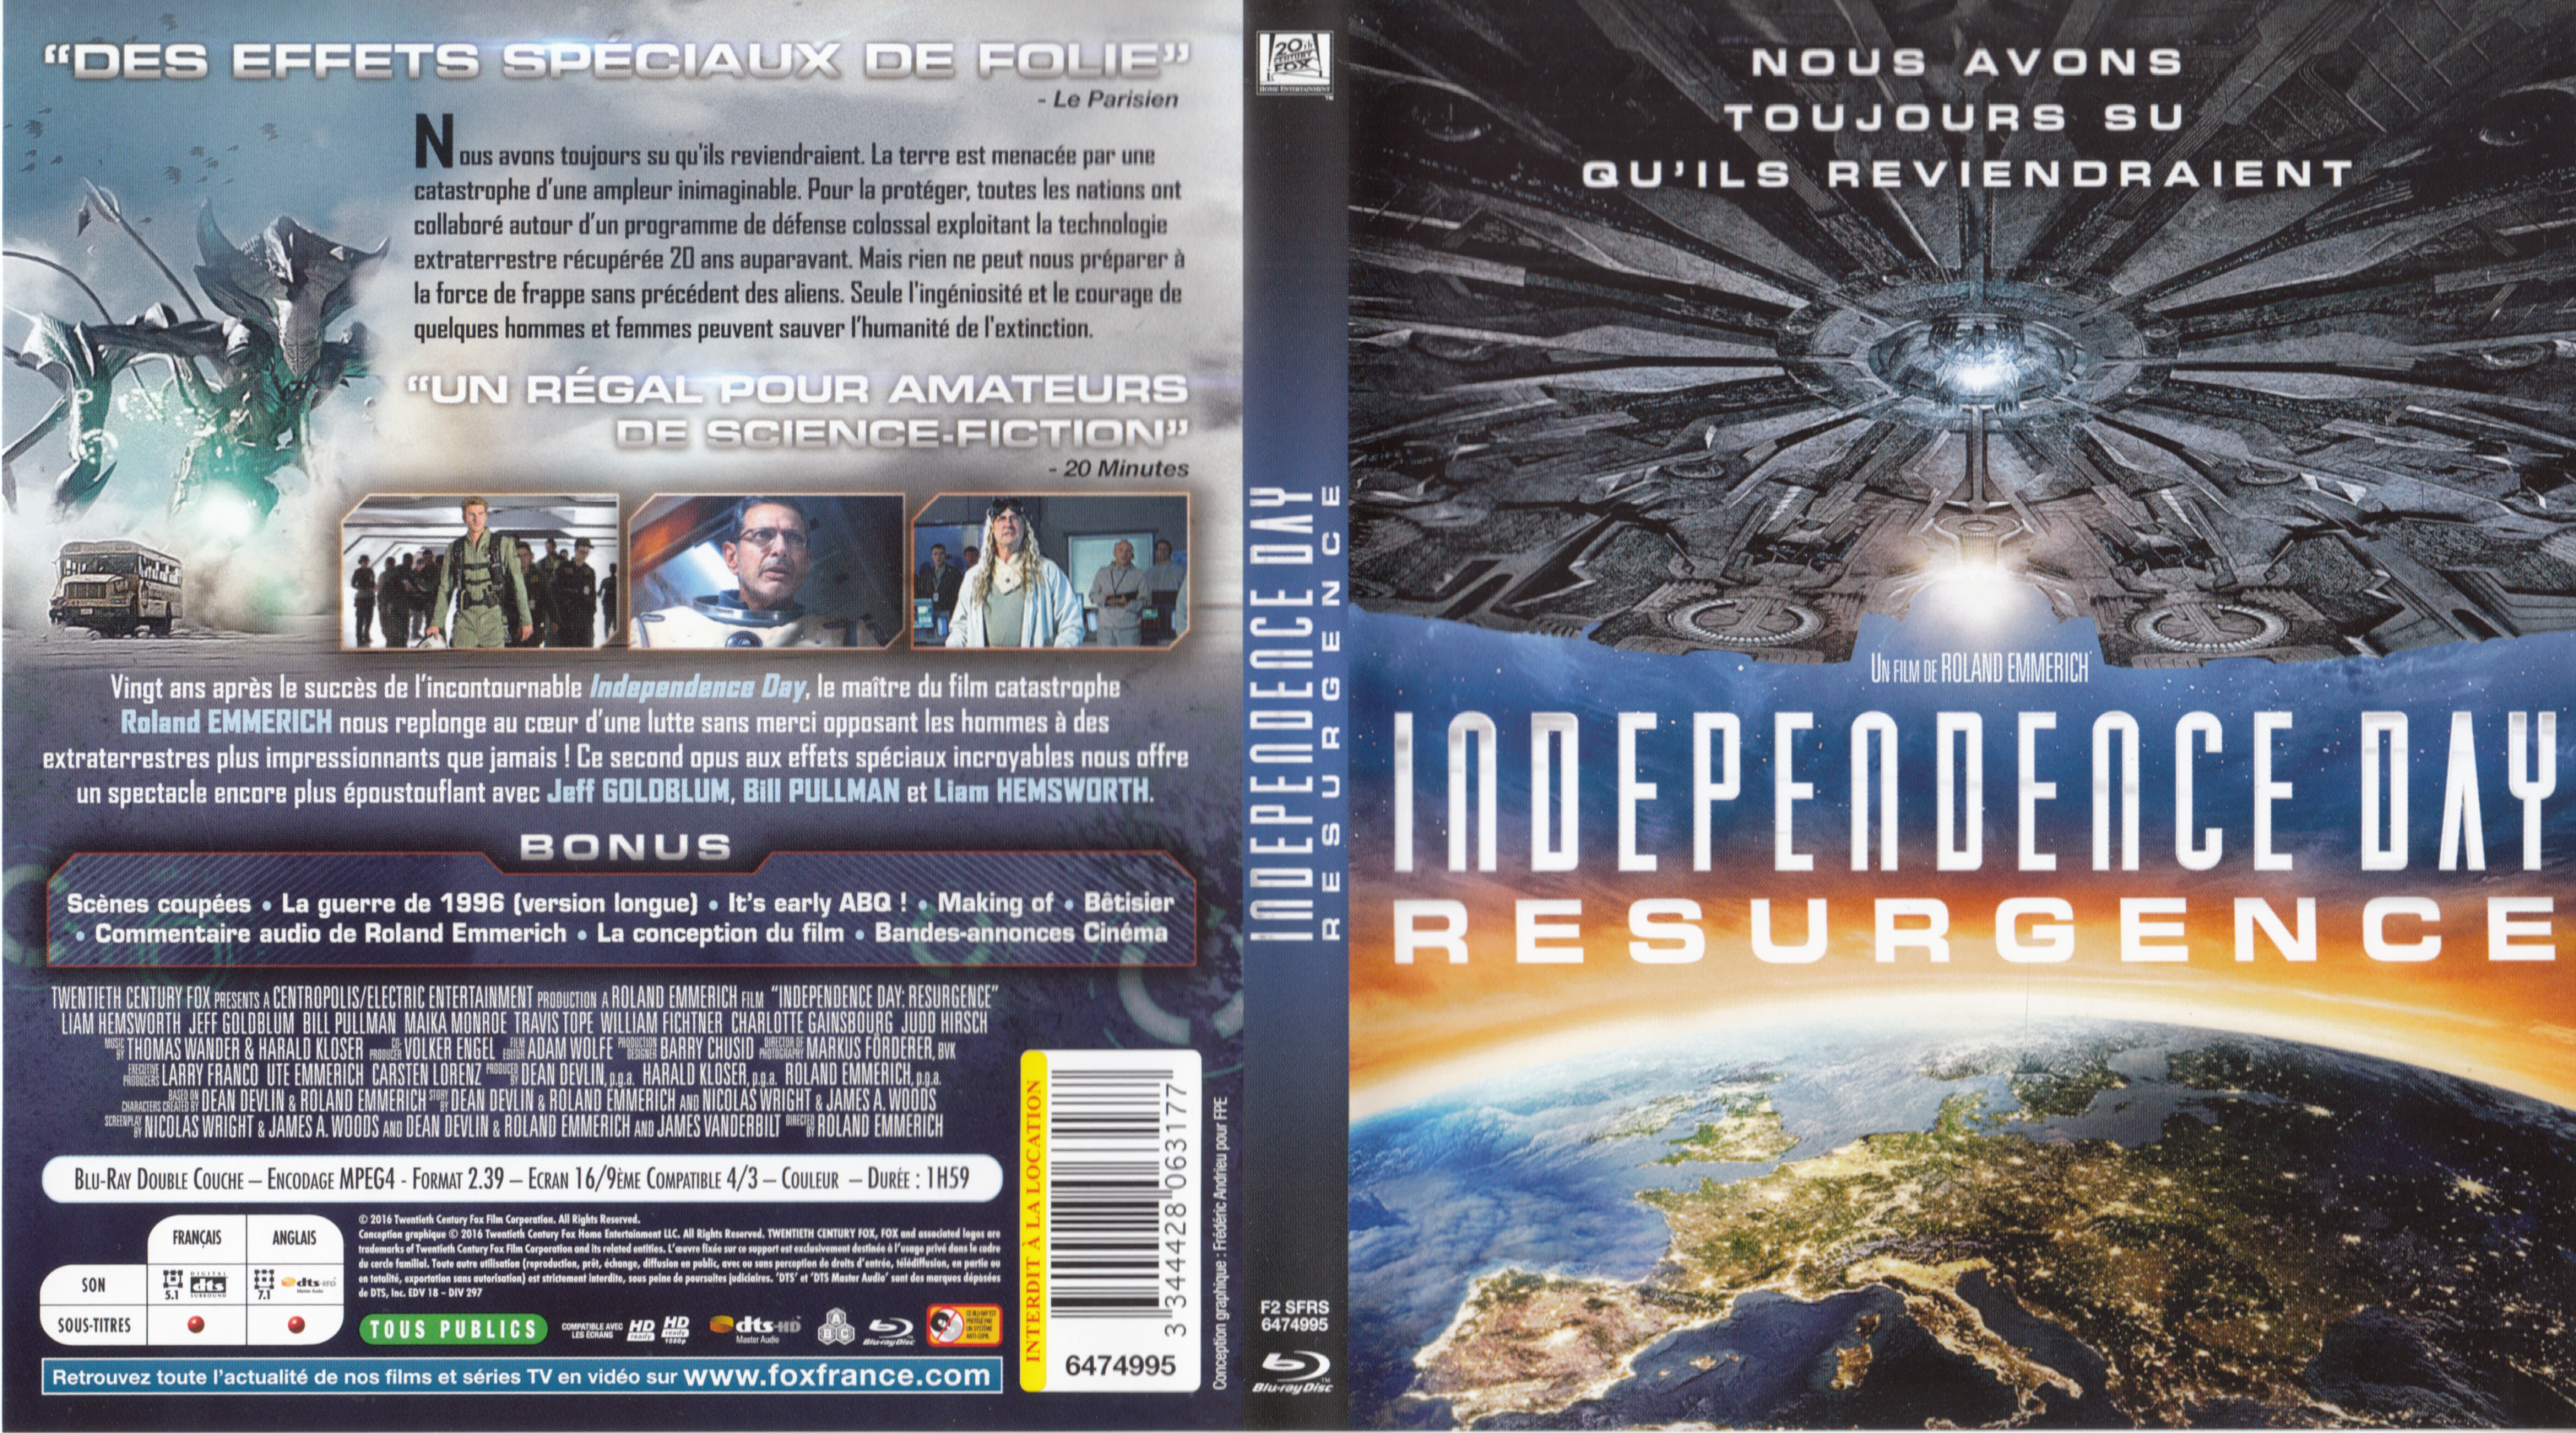 Jaquette DVD Independence Day Resurgence (BLU-RAY) v2